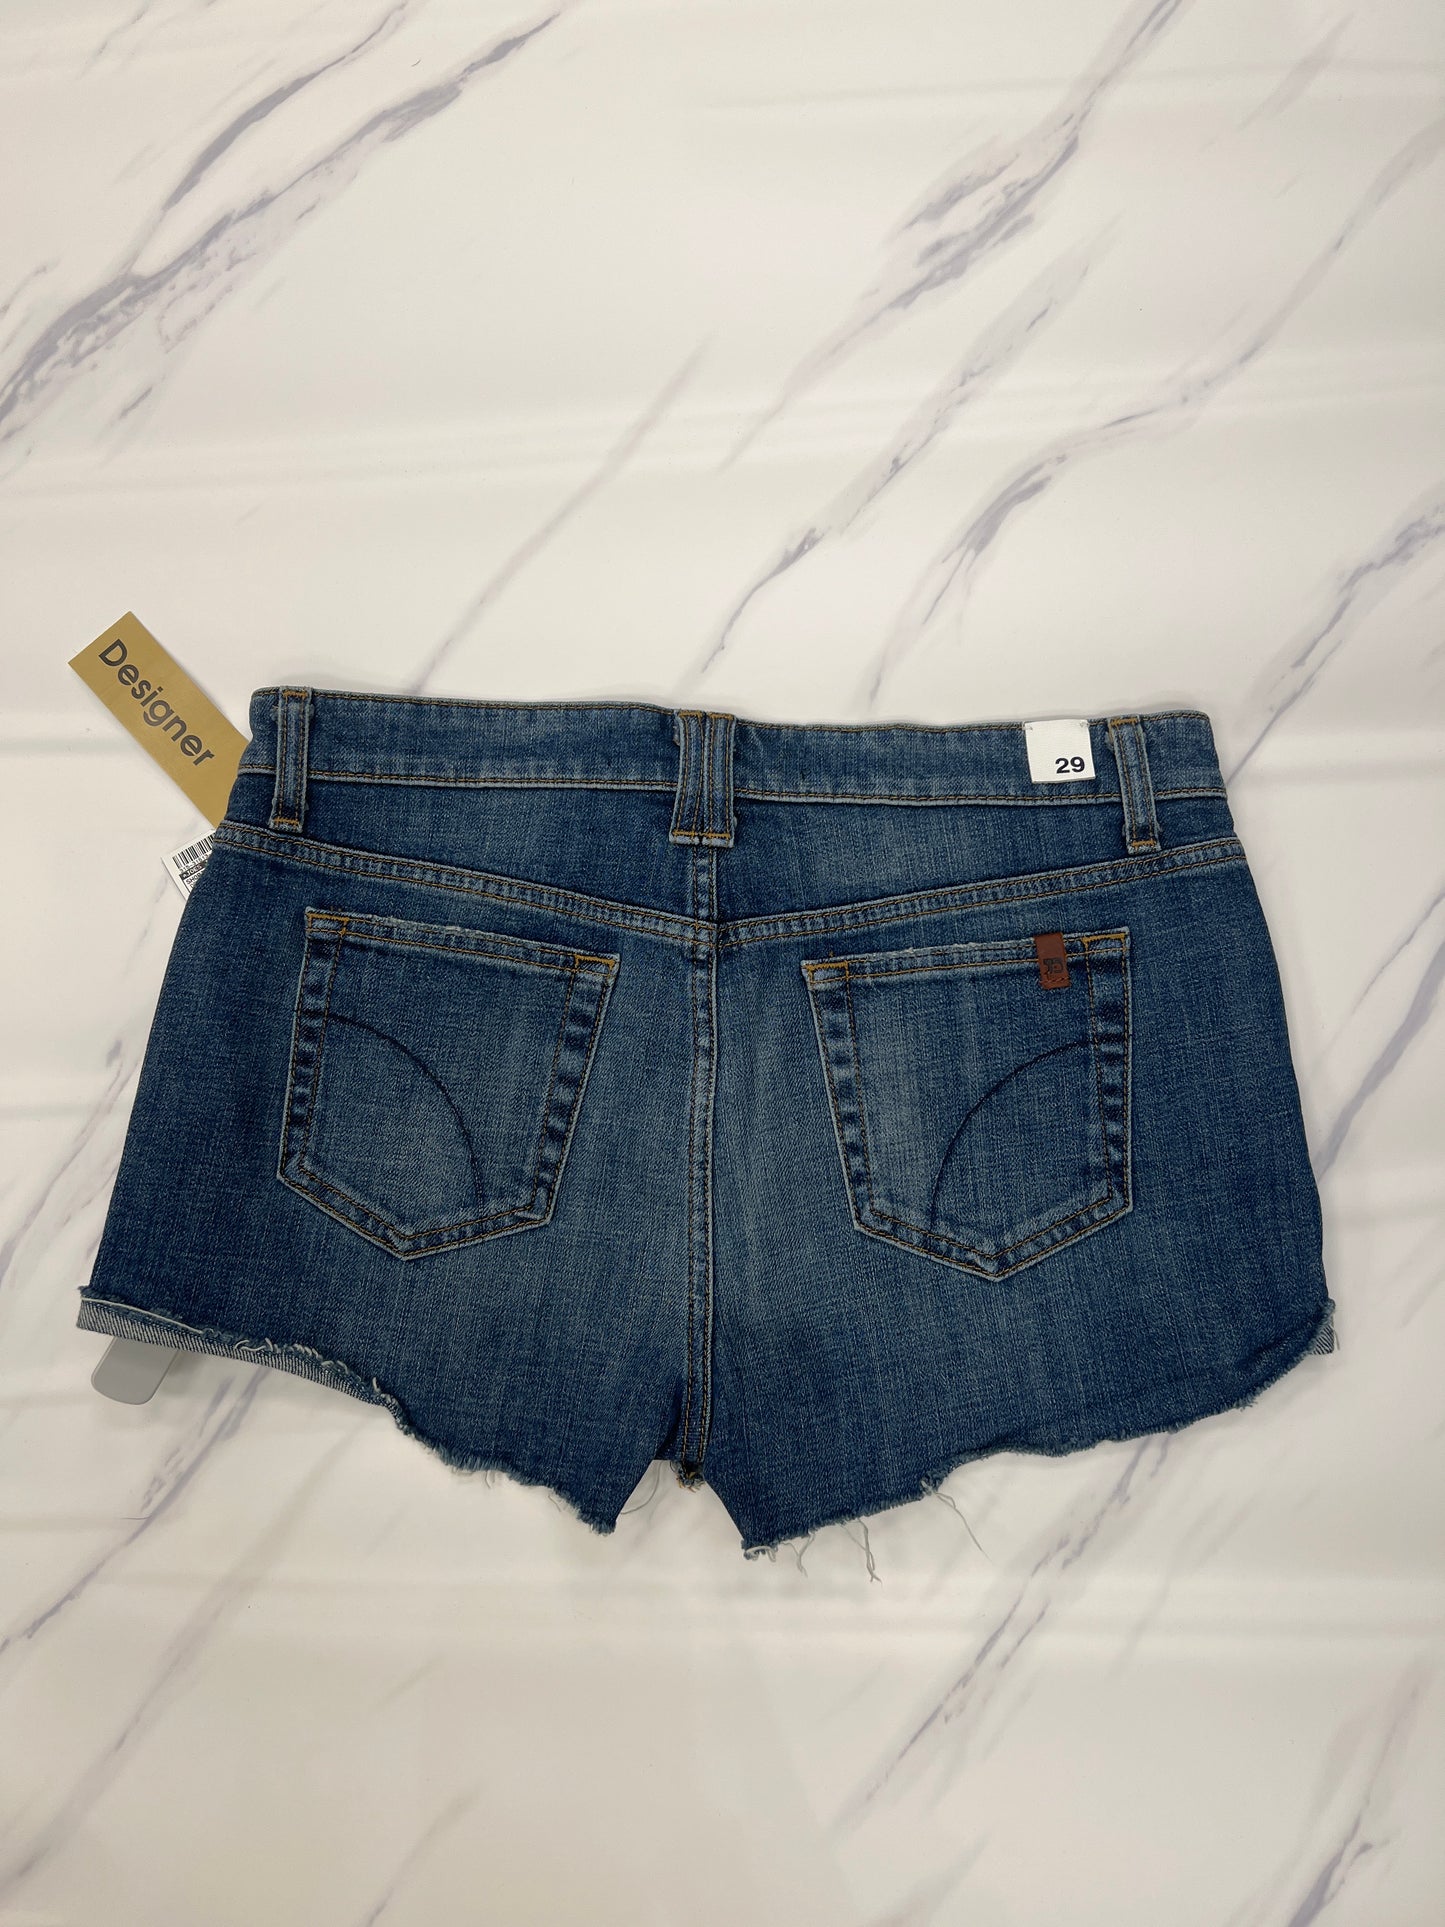 Shorts By Joes Jeans  Size: 8